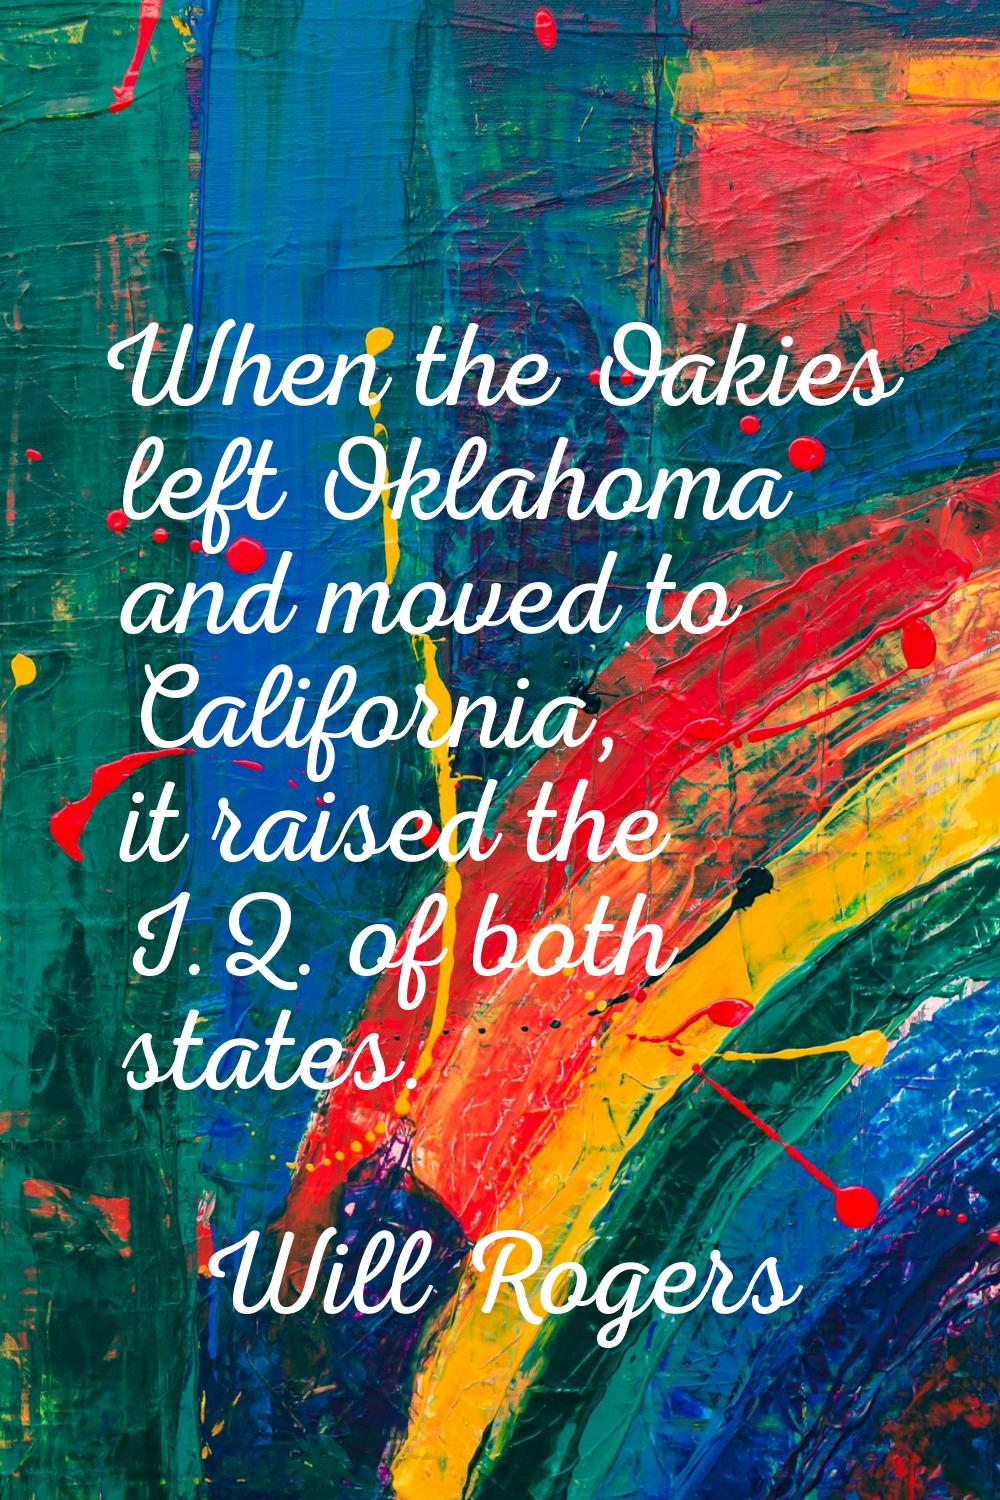 When the Oakies left Oklahoma and moved to California, it raised the I.Q. of both states.